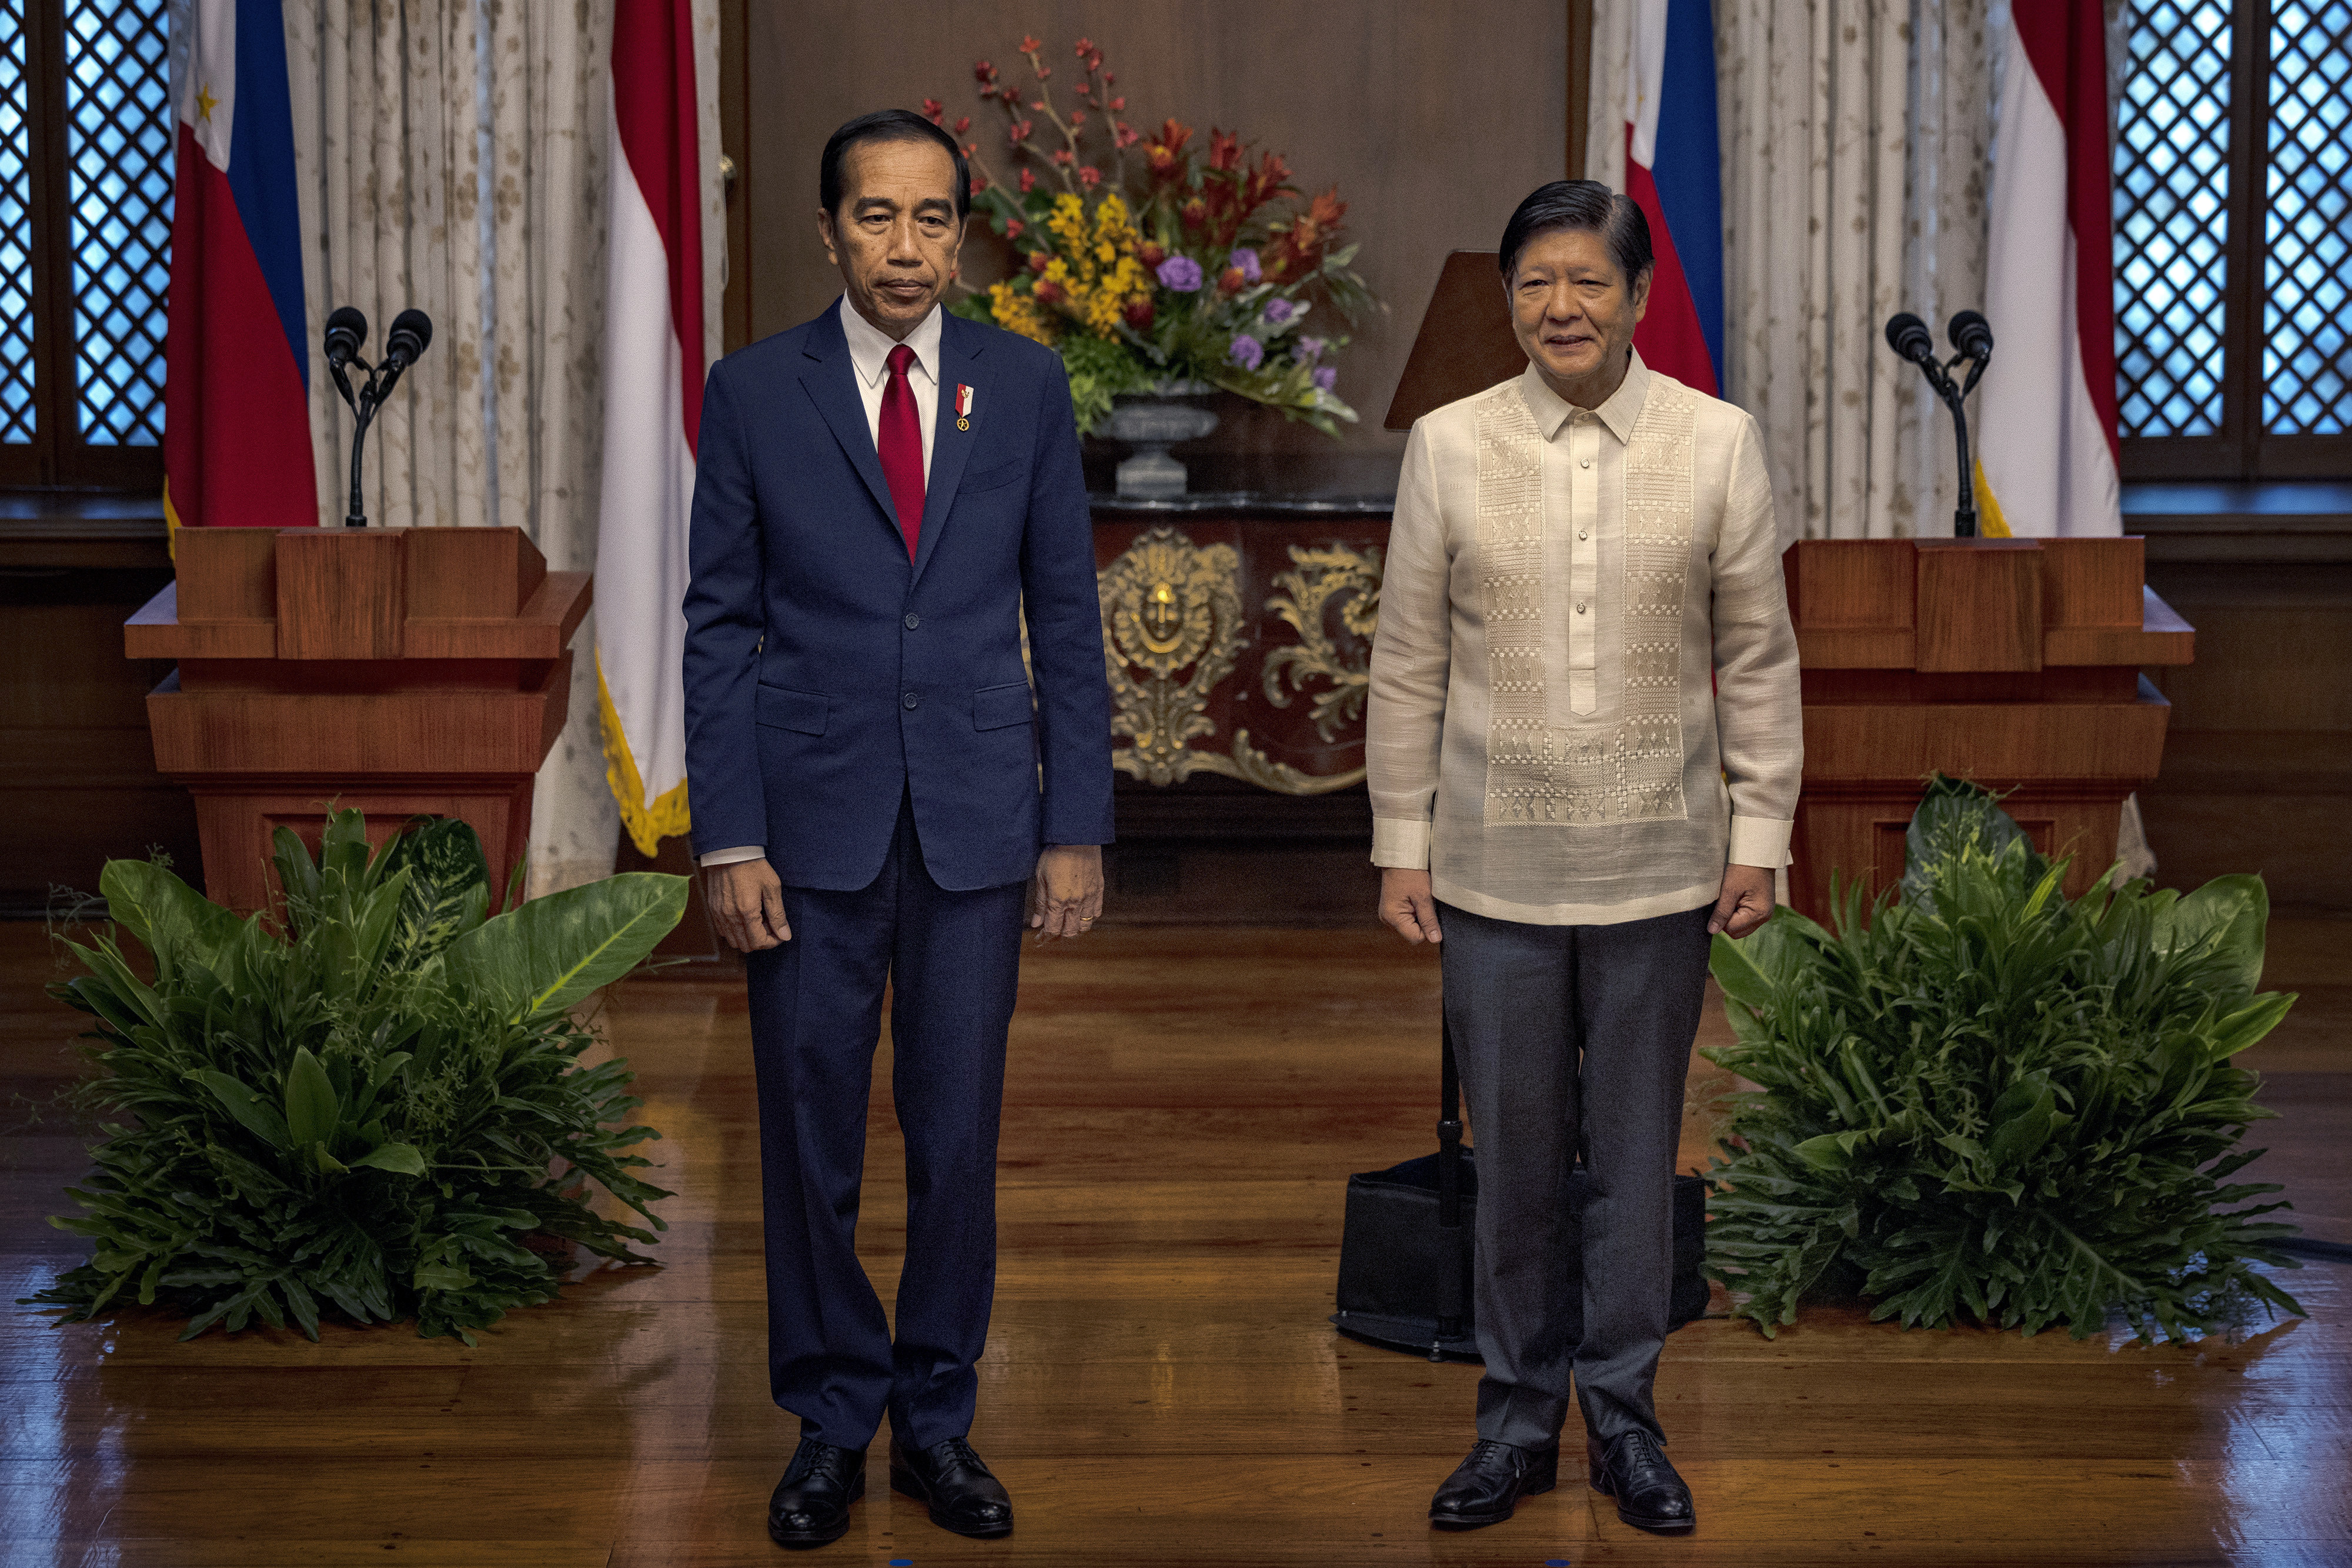 Indonesian President Joko Widodo (left) and Philippine President Ferdinand Marcos, Jnr. look on before delivering a joint statement in Manila on January 10. Photo: AP